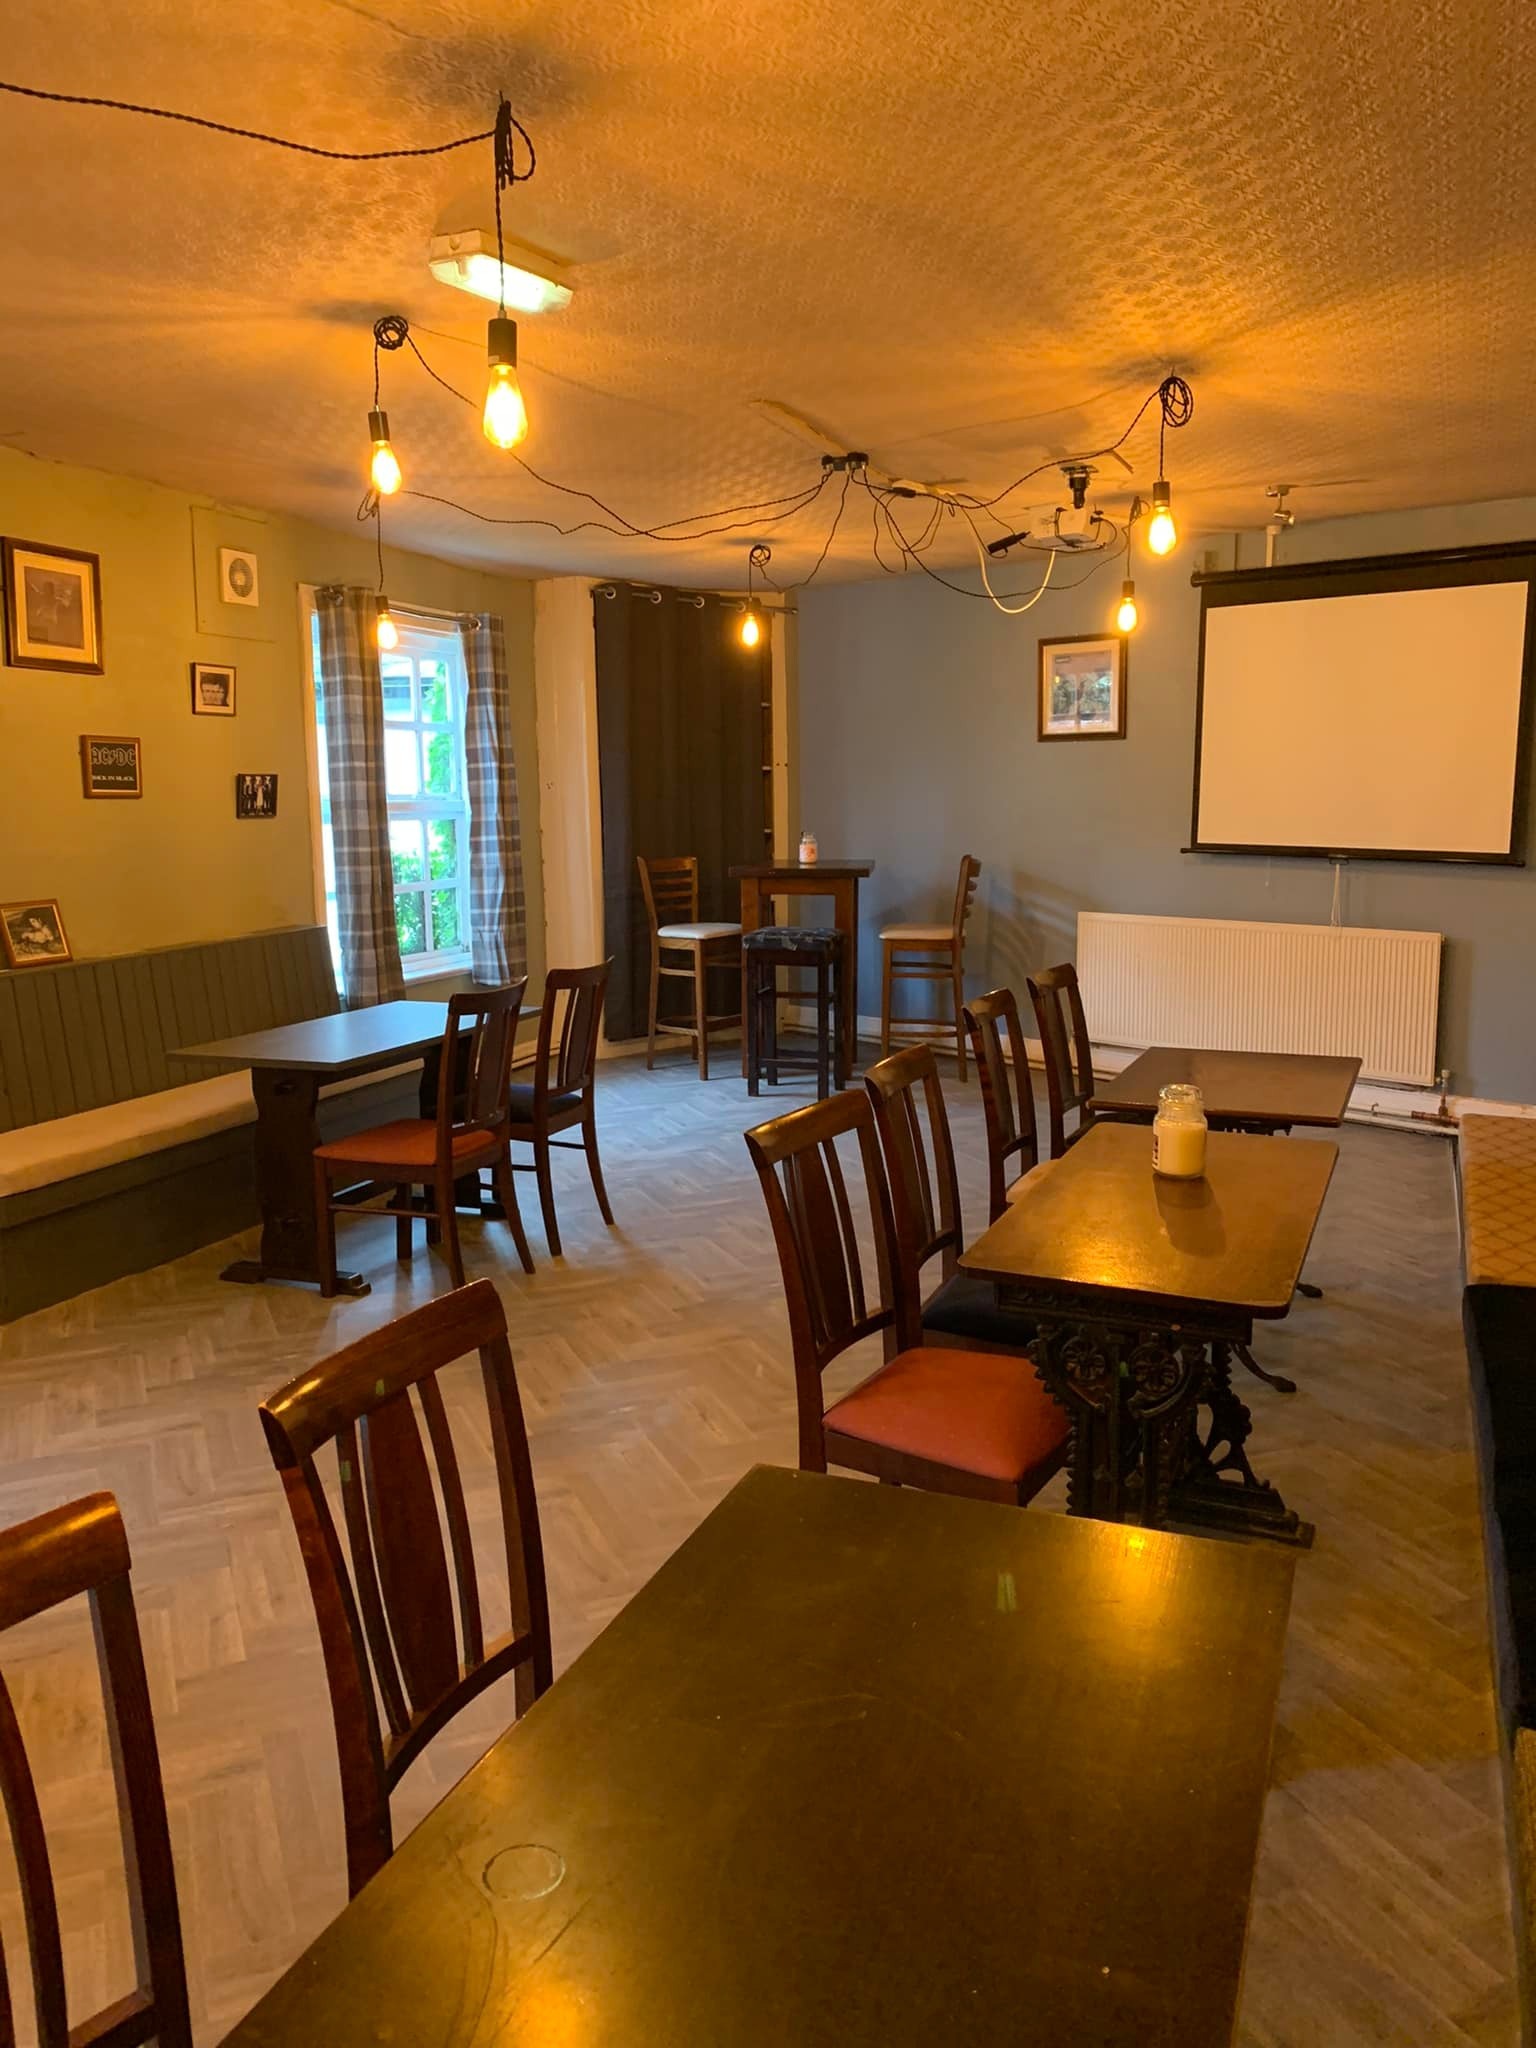 The function room